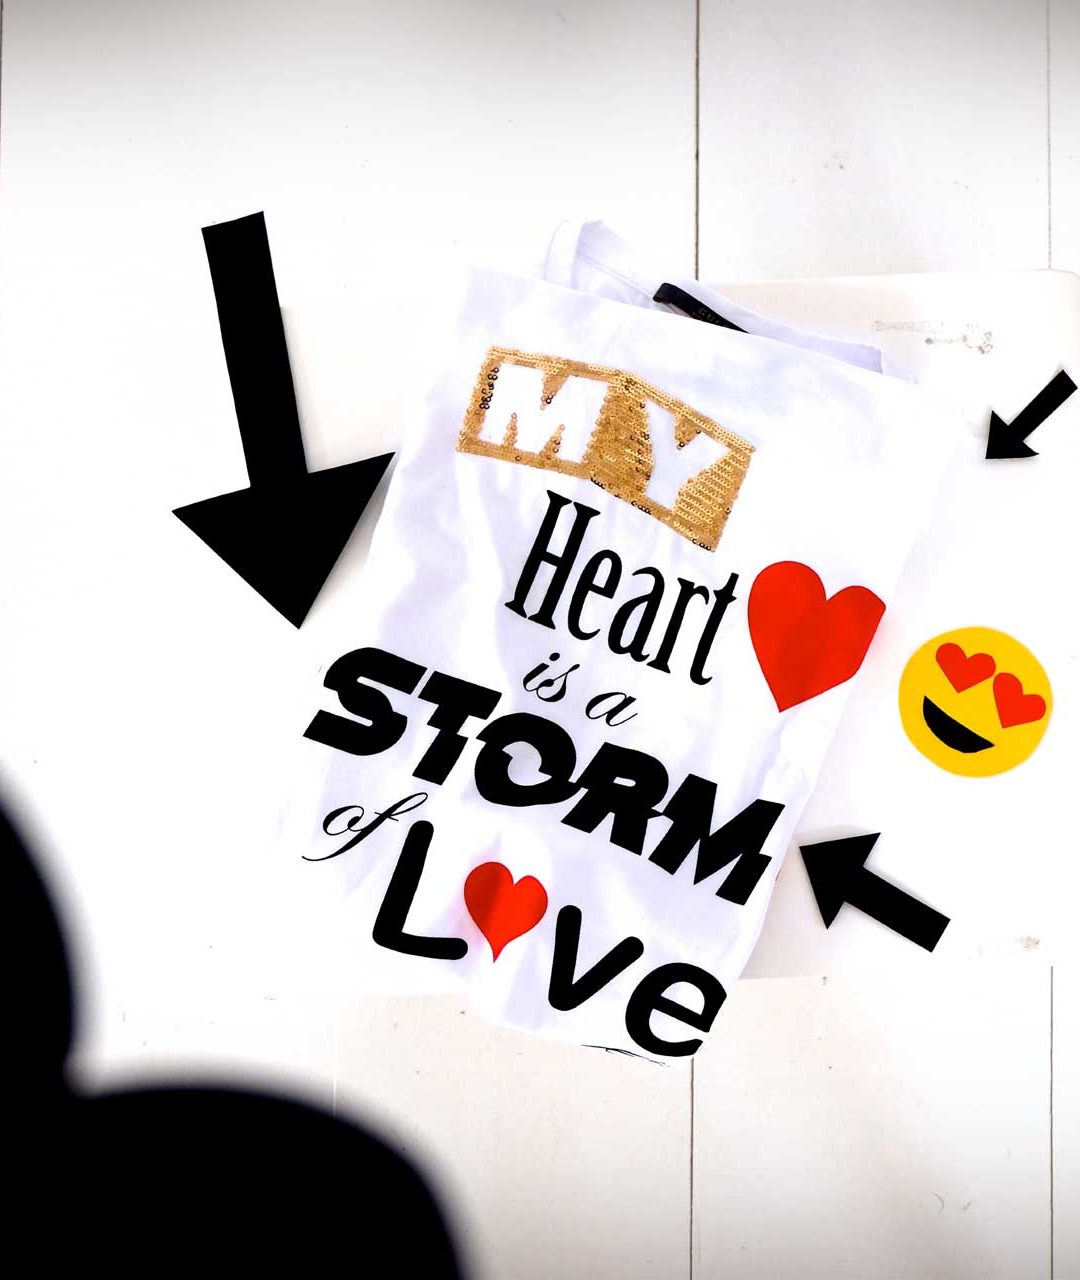 statement #3: my heart is a storm of love